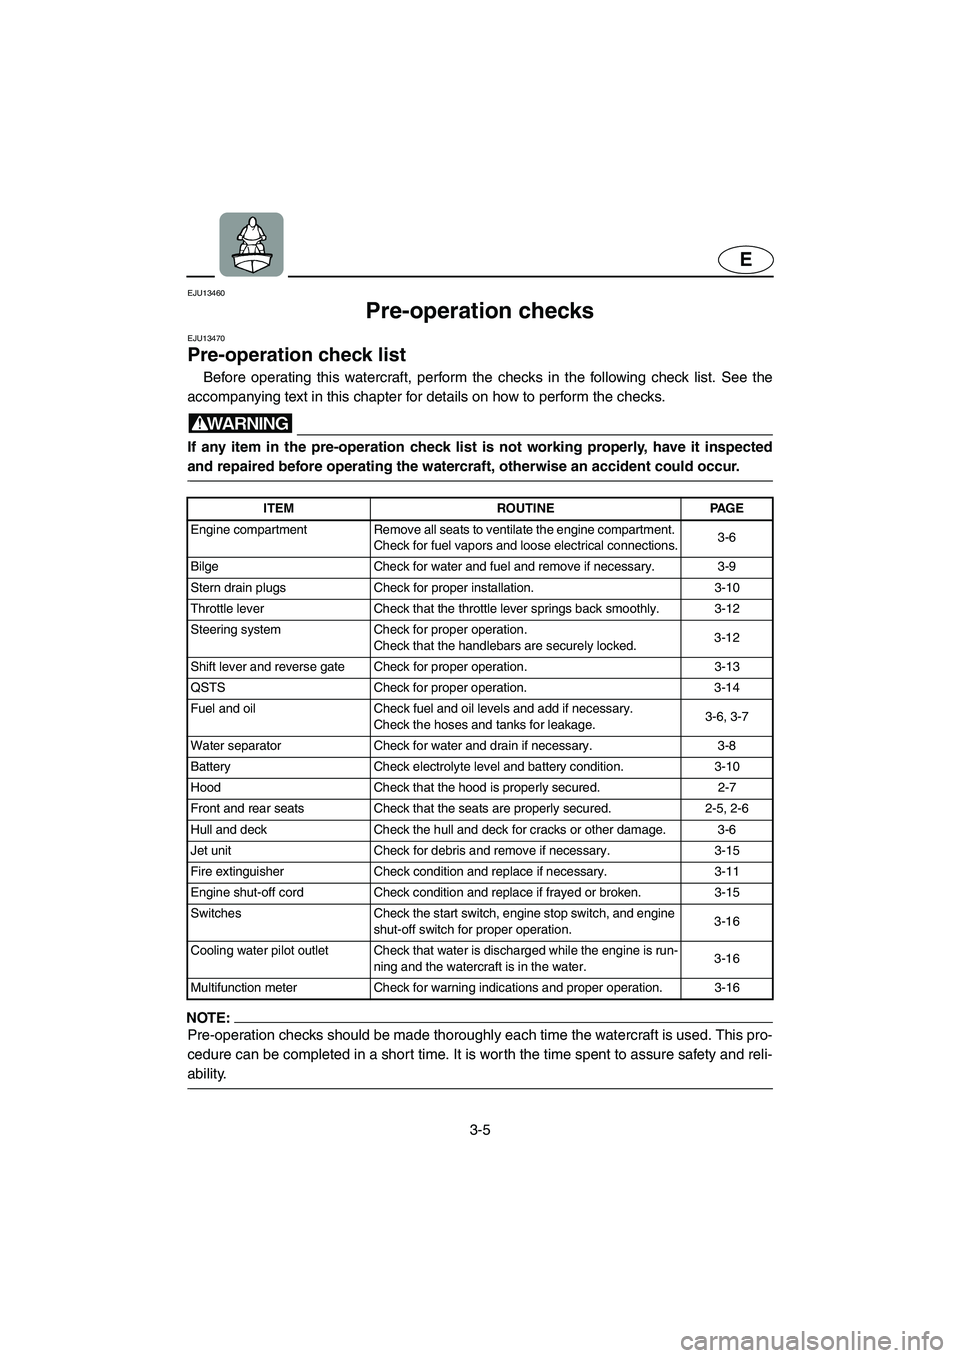 YAMAHA FX HO 2006 Manual PDF 3-5
E
EJU13460 
Pre-operation checks  
EJU13470 
Pre-operation check list 
Before operating this watercraft, perform the checks in the following check list. See the
accompanying text in this chapter f